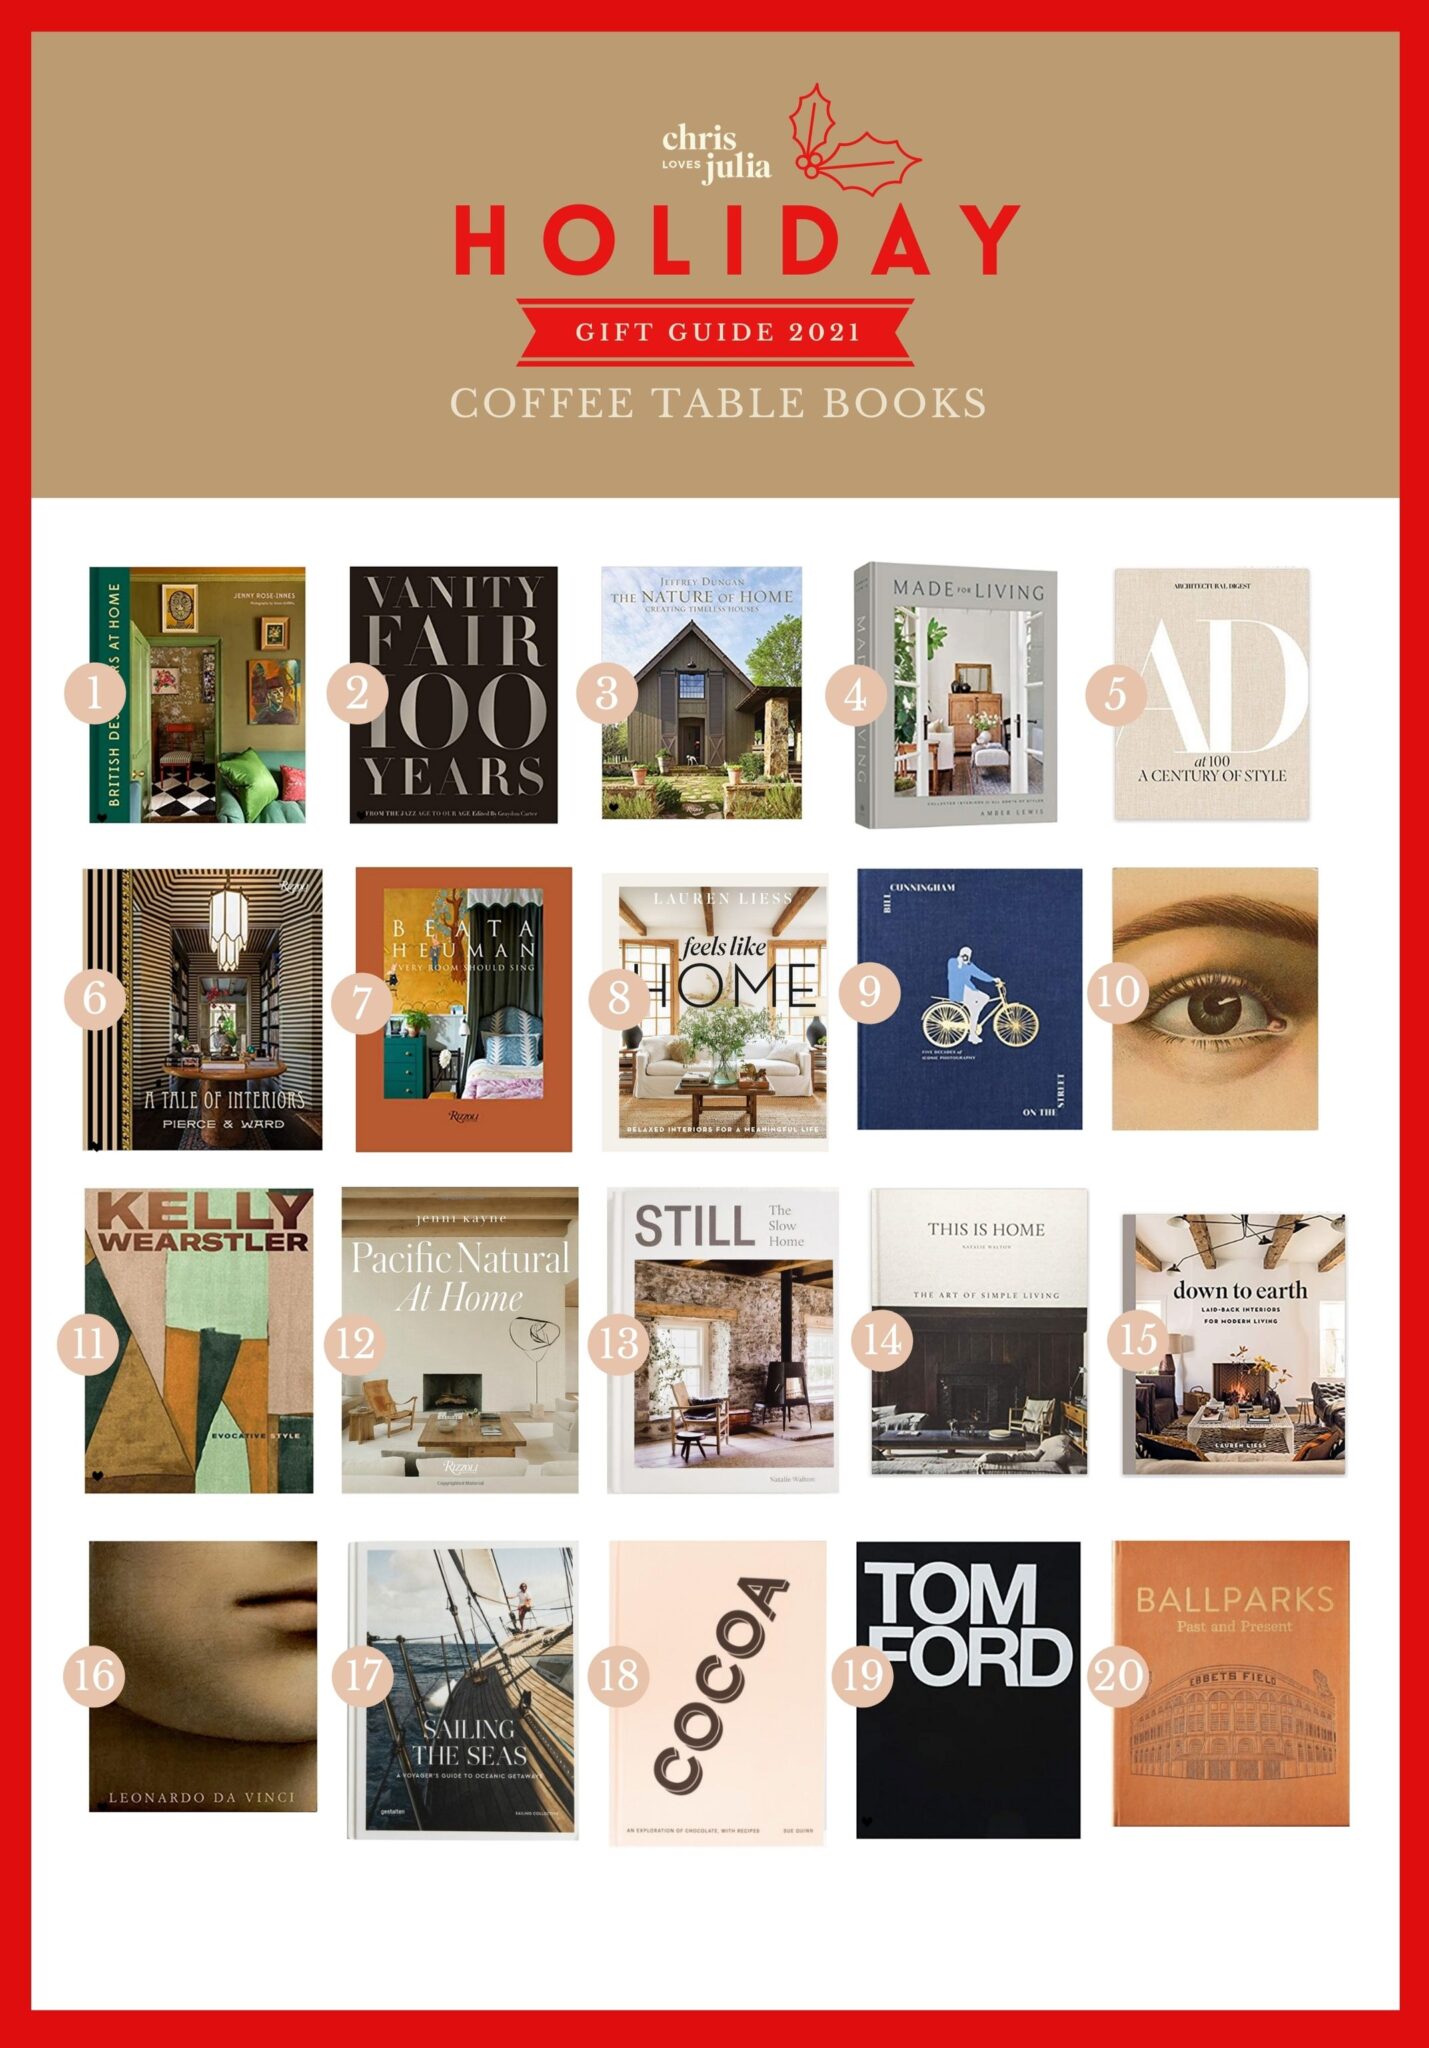 6 Coffee Table Books Jewelry Lovers Will Devour – Robb Report